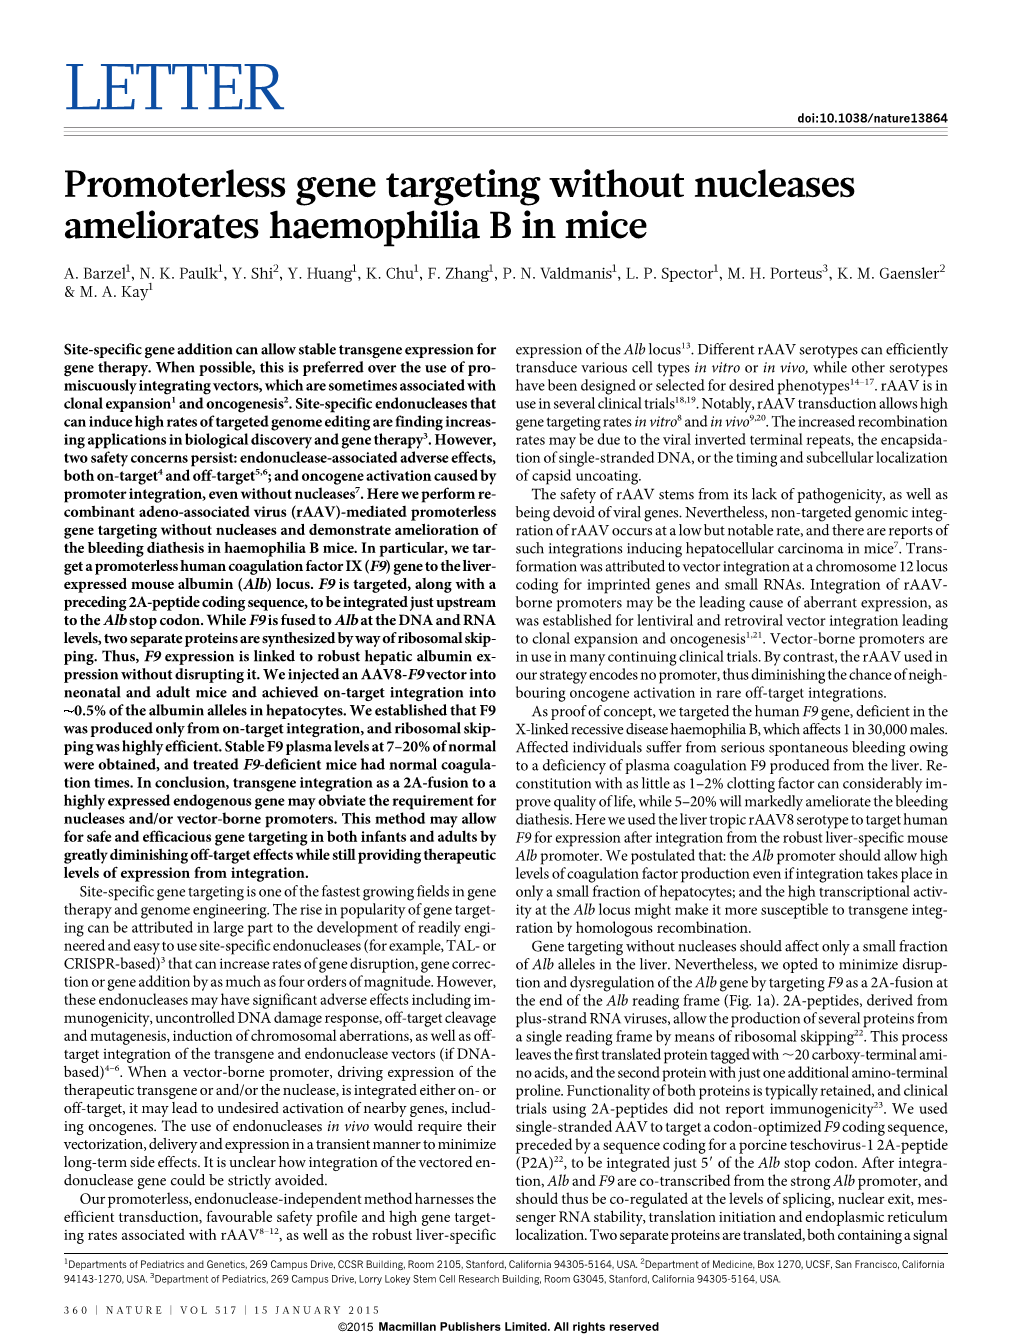 Promoterless Gene Targeting Without Nucleases Ameliorates Haemophilia B in Mice